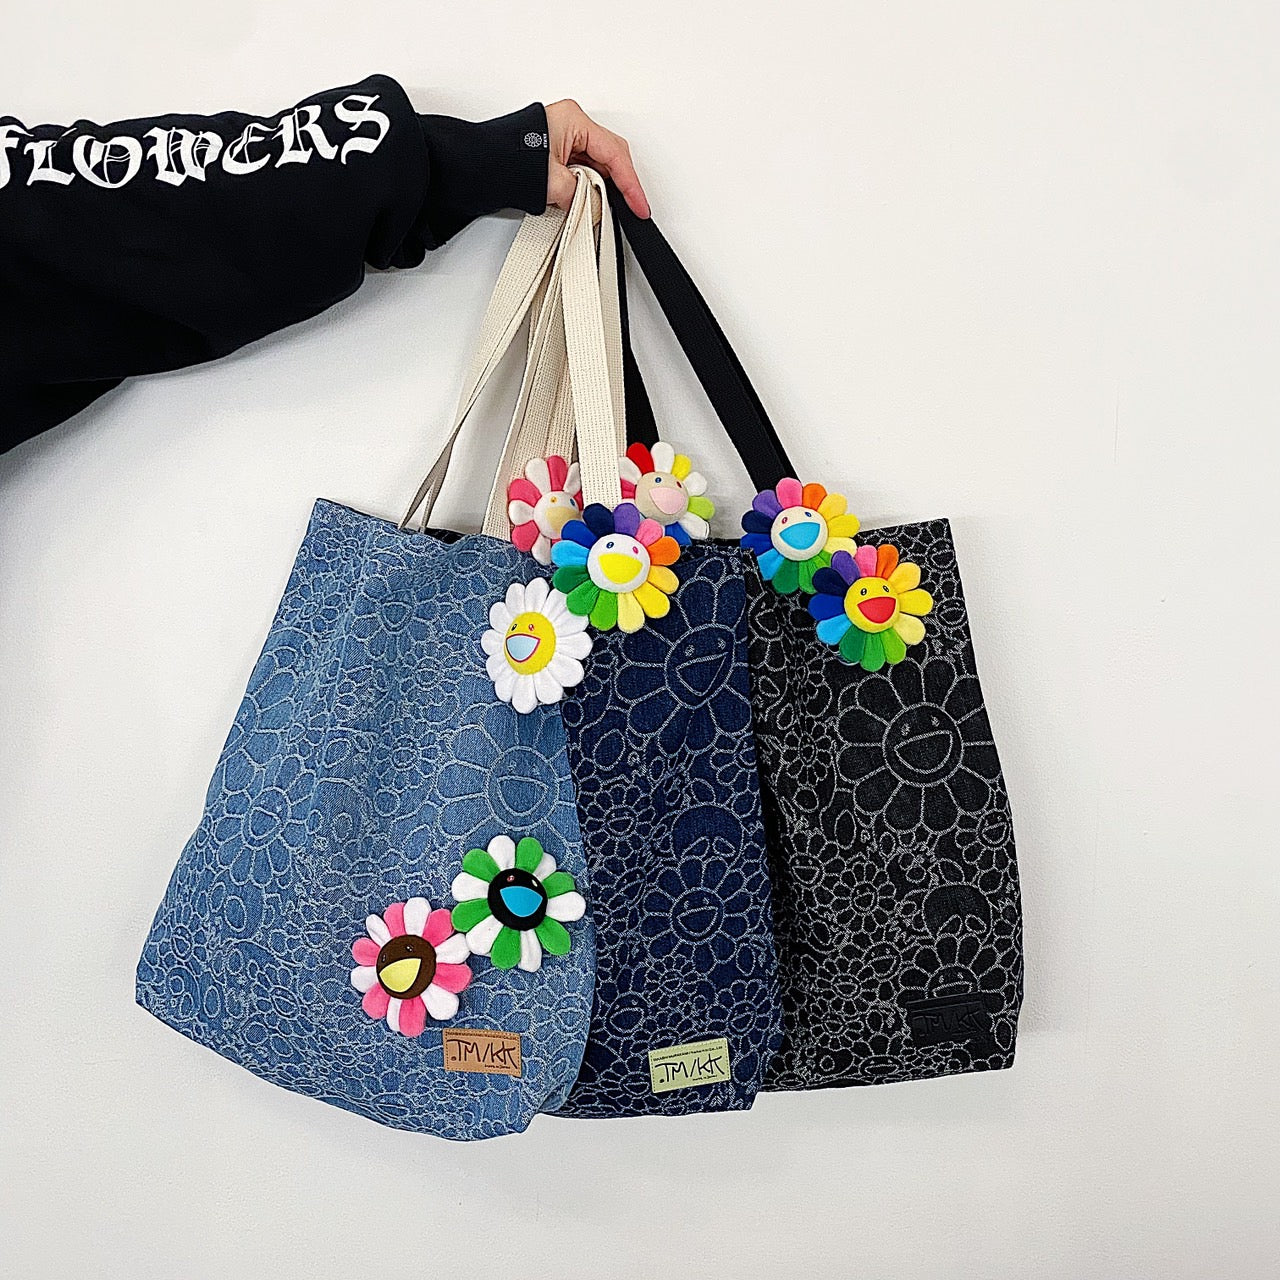 【©Takashi Murakami / kaikai kiki】<br> The new "Aprons & Bags" from the popular original denim series will be on sale online from 8pm today, December 18th (Monday)!